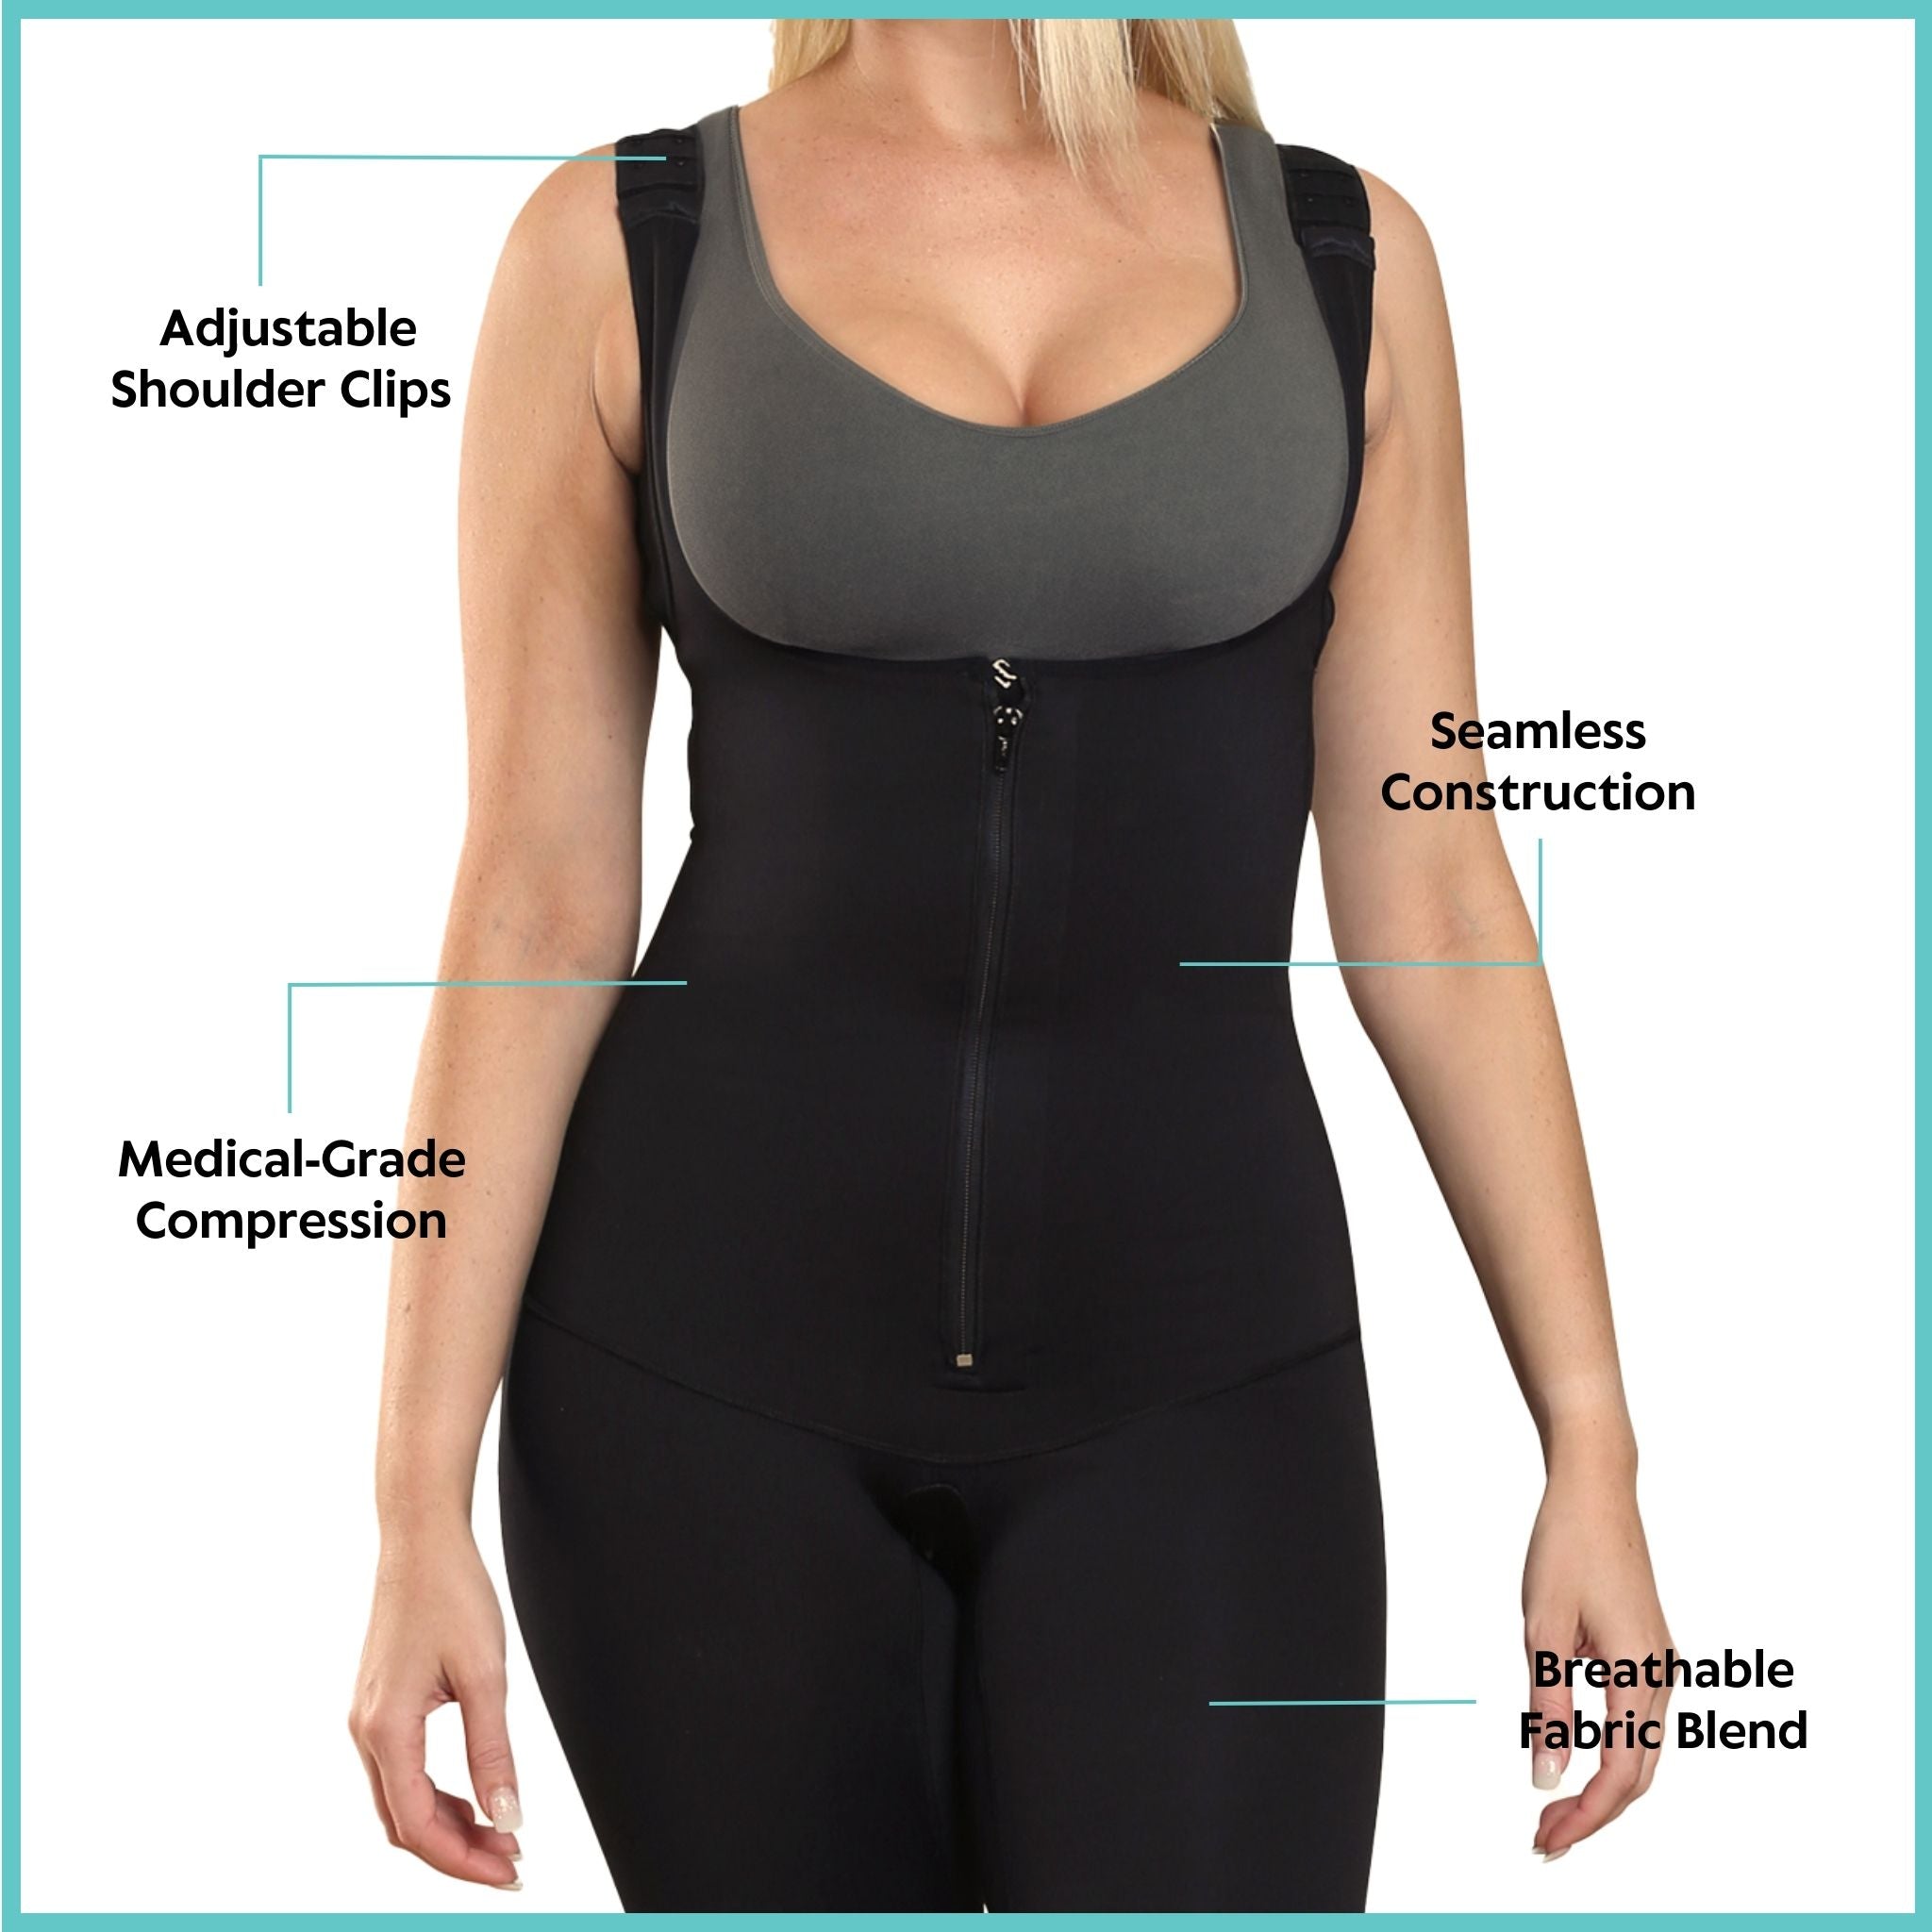 Cotton 4-in-1 Blended High Waist Tummy & Thigh Shapewear Black at